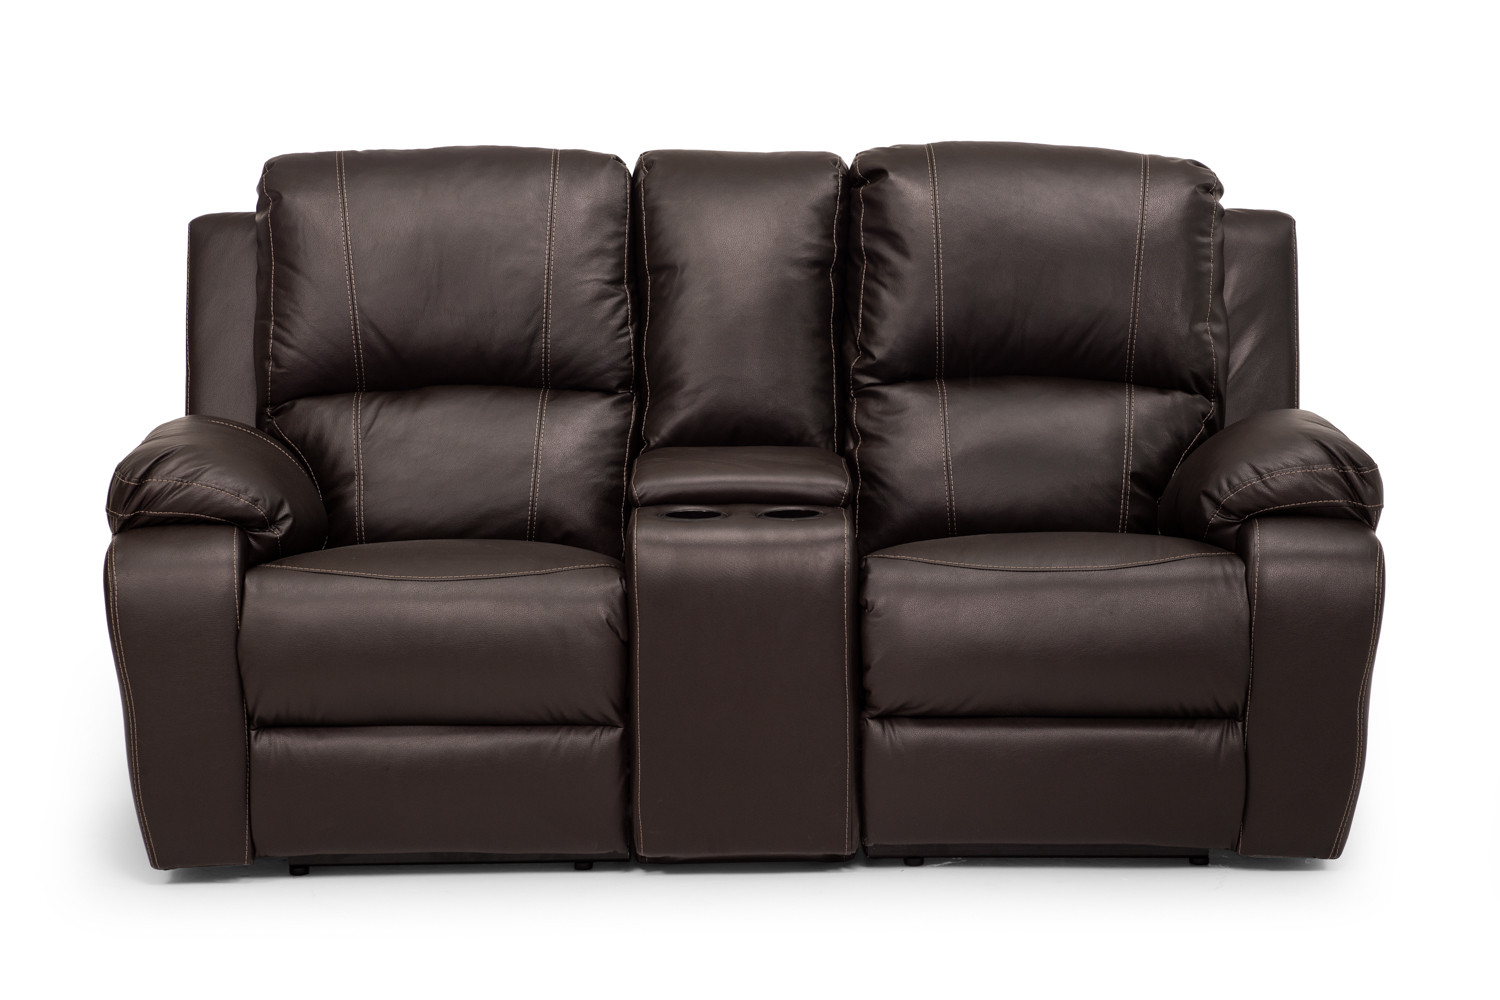 Charlton 2 Seater Leather Cinema Recliner - Brown Recliner Couches - 2